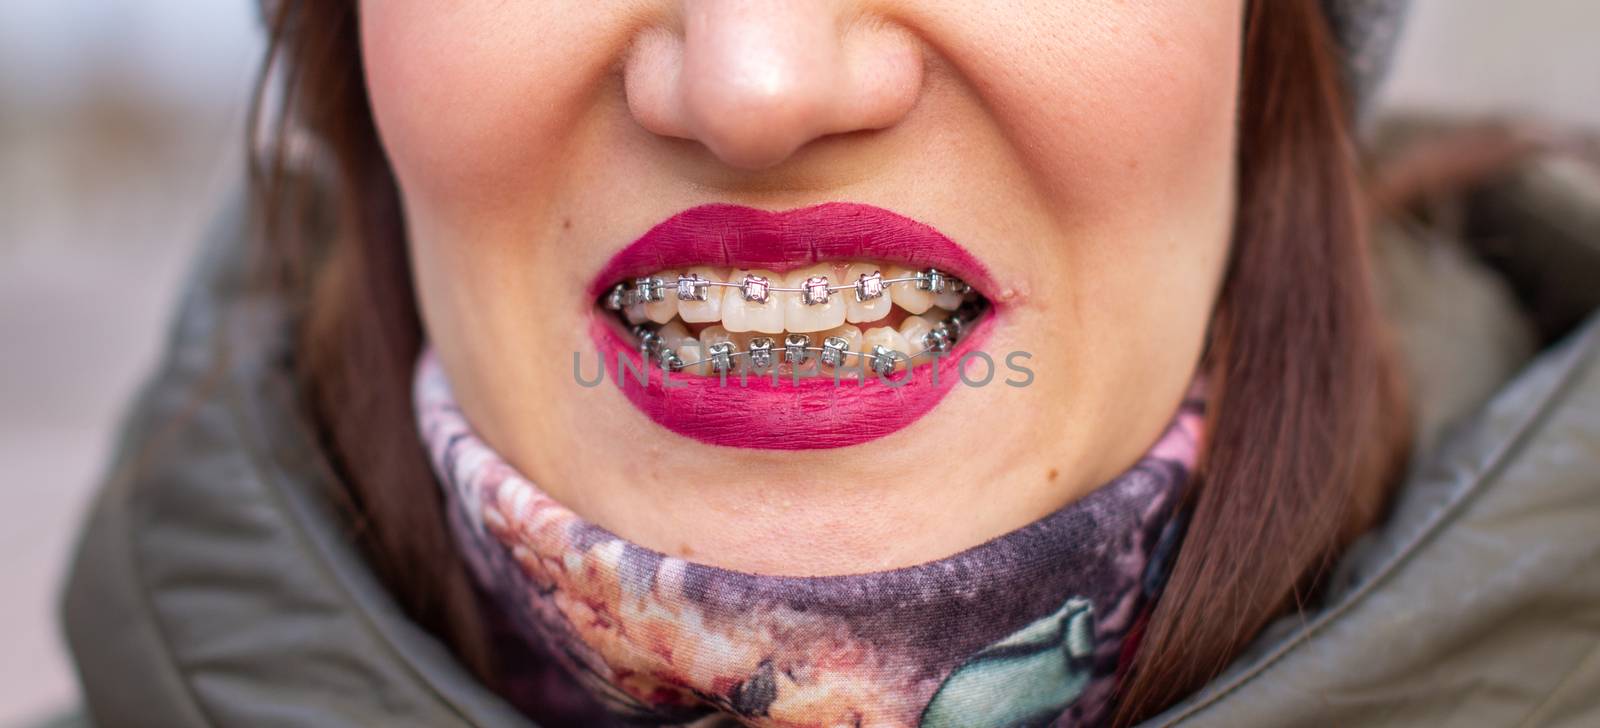 The brace system in the girl's smiling mouth, close-up of red lips by AnatoliiFoto